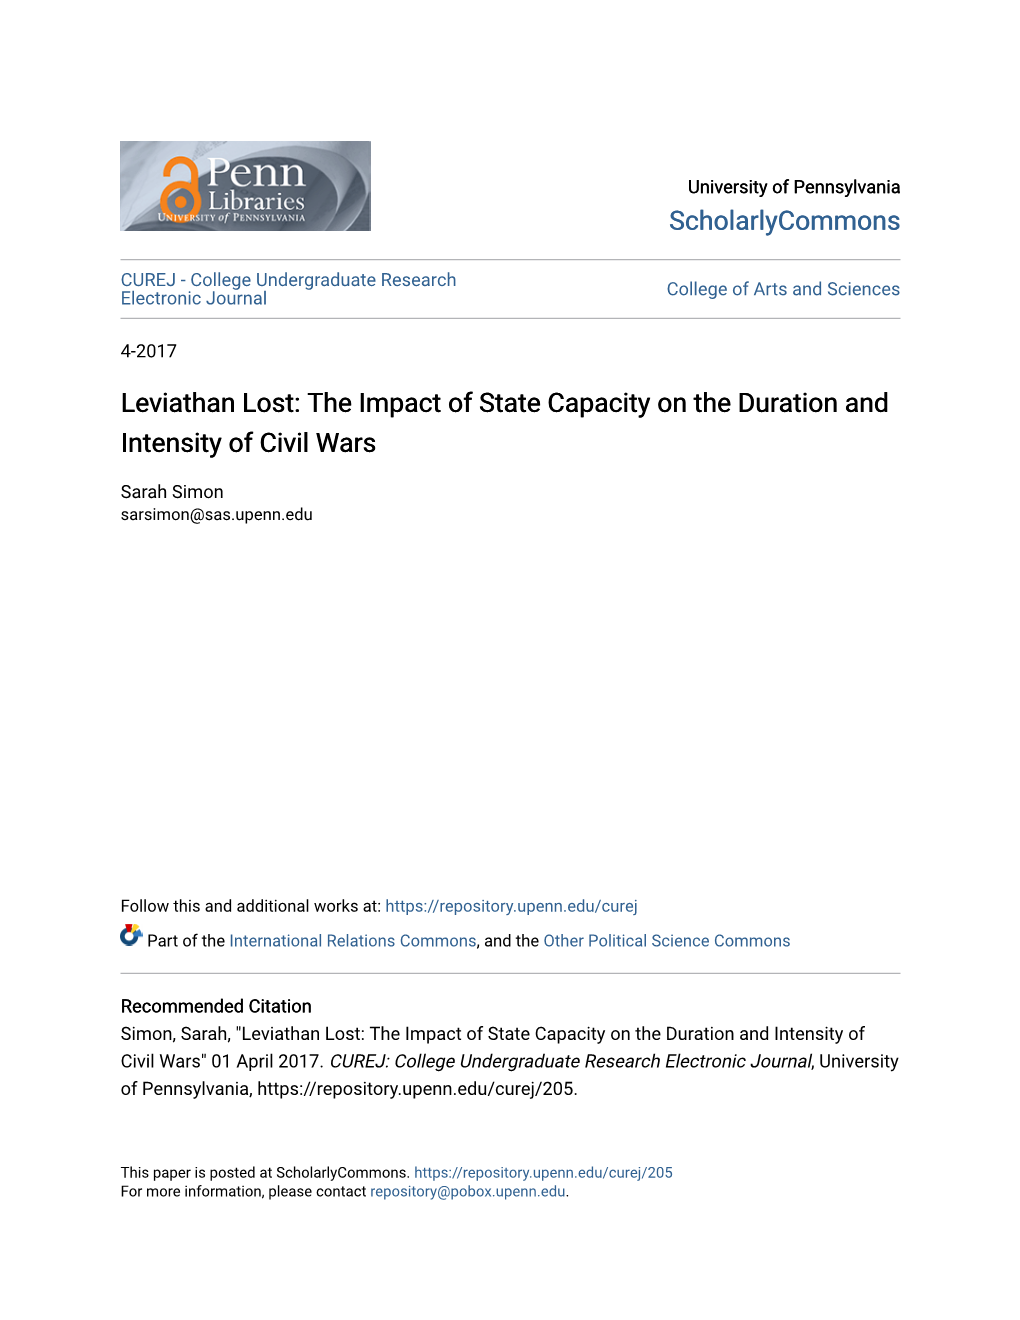 The Impact of State Capacity on the Duration and Intensity of Civil Wars